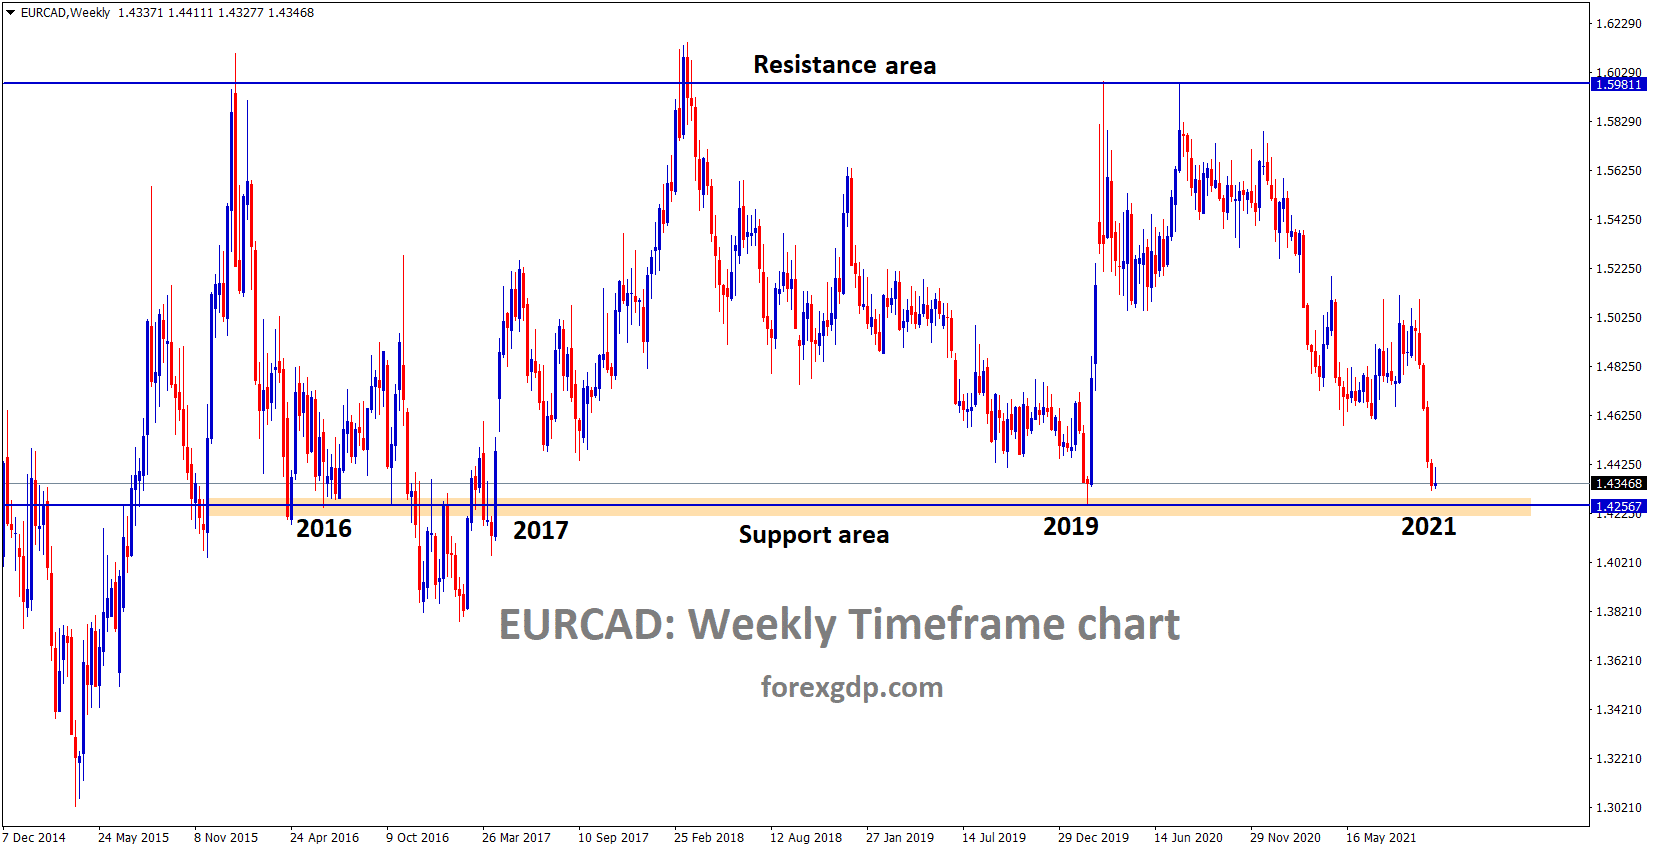 EURCAD is near to the major support area